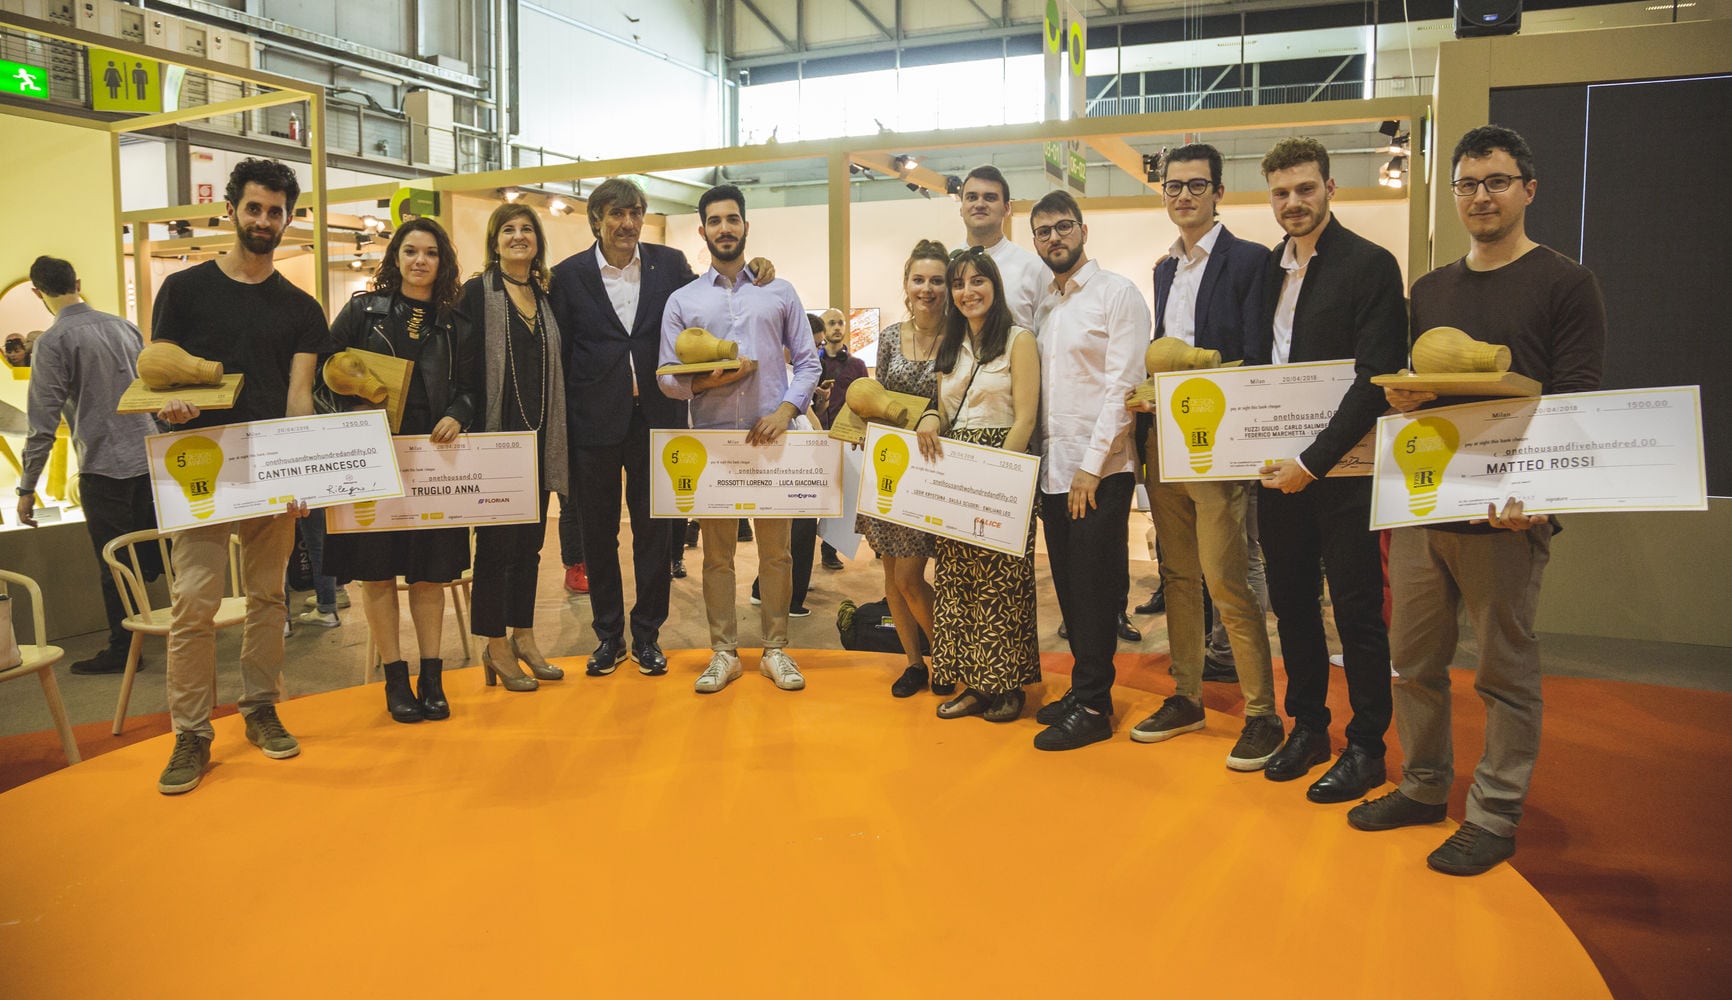 SCM at the Salone del Mobile to award top rising designers